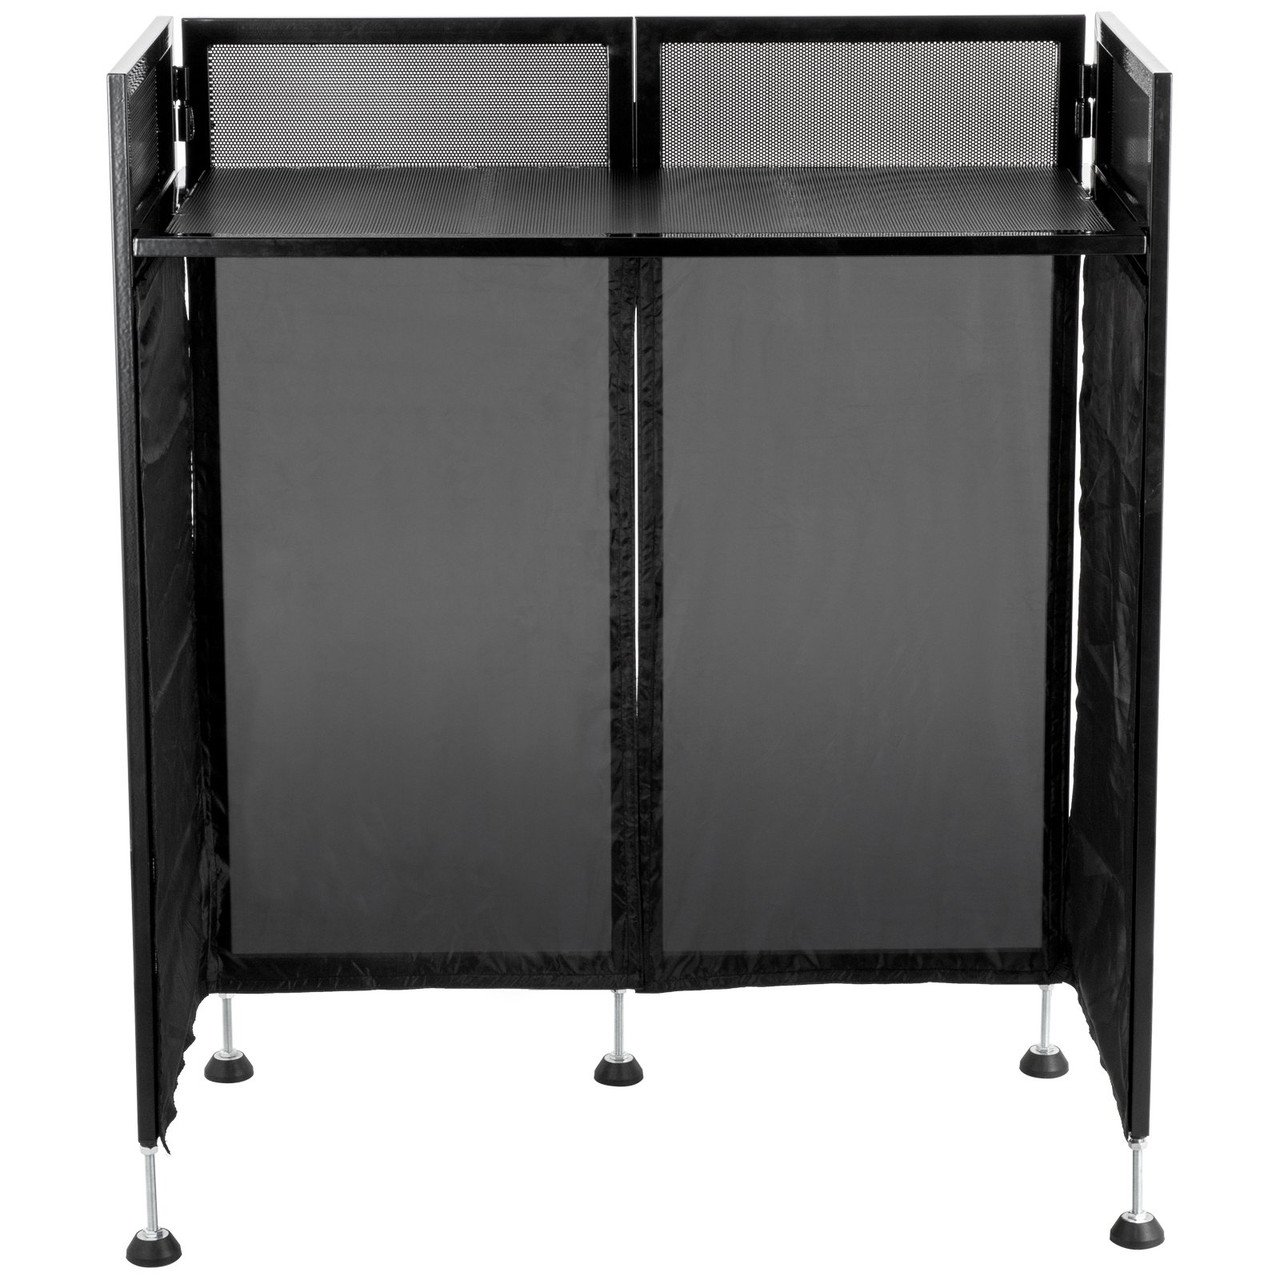 VEVOR DJ Facade Table 20x40x45 Inches, DJ Booth Flat Table Top 20x40 Inch, Adjustable DJ Event Facade with White & Black Scrim, Folding DJ Booth Metal Frame, Foldable Cover Screen